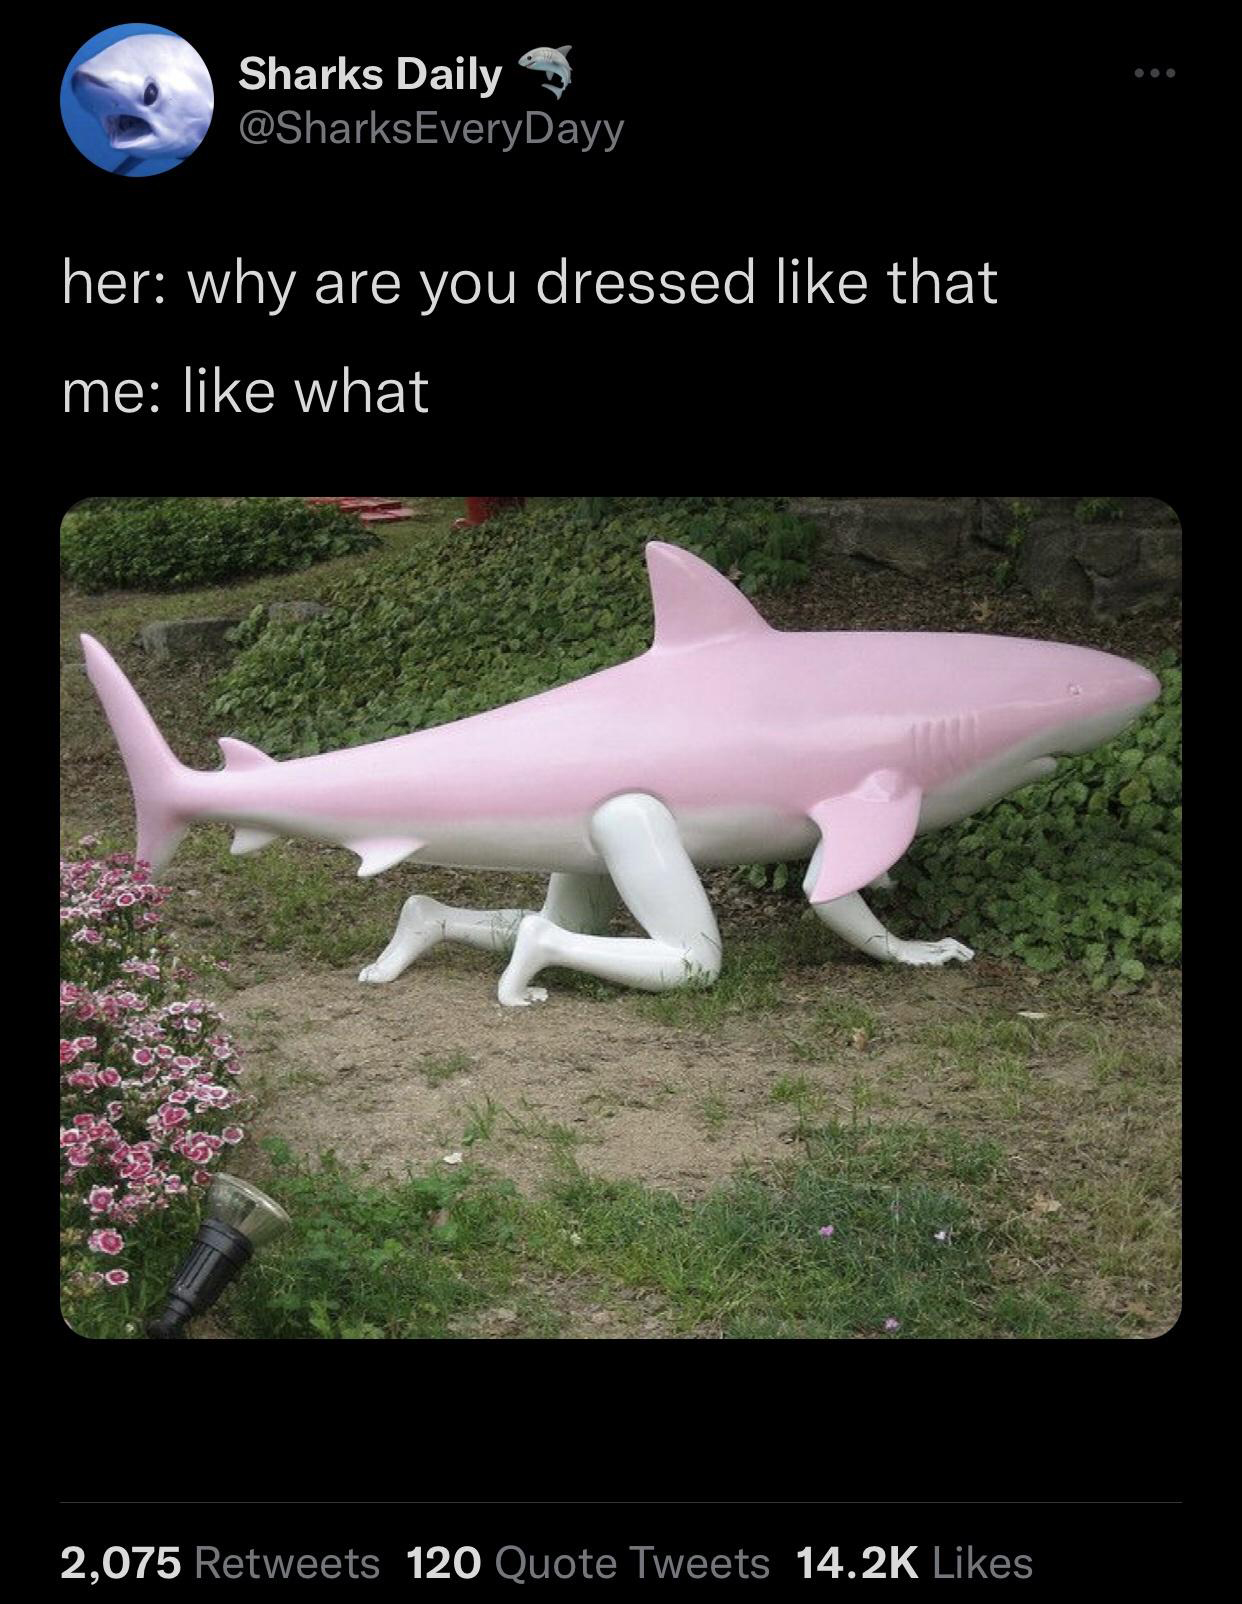 dank memes - shark dank meme - Sharks Daily her why are you dressed that me what S 2,075 120 Quote Tweets